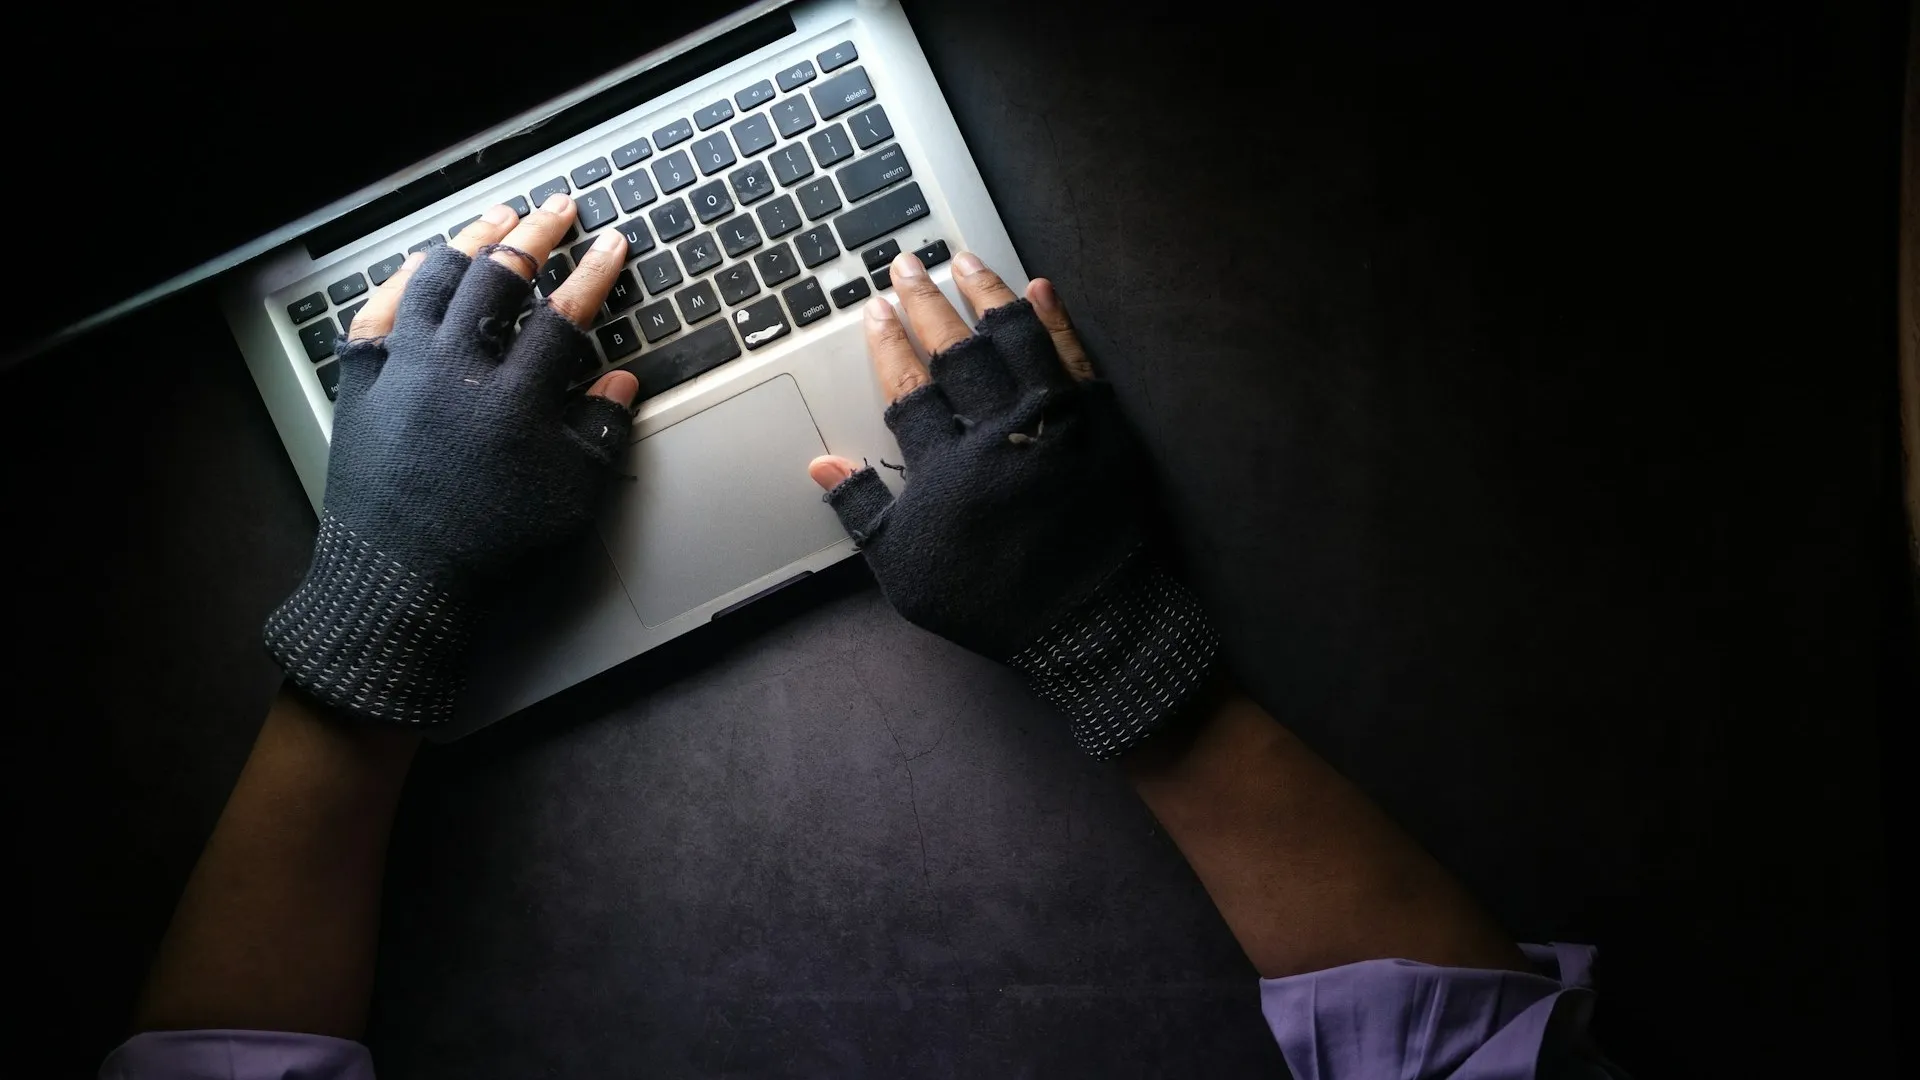 Forlit faces accusations of hacking in separate New York case (Credits: Unsplash)